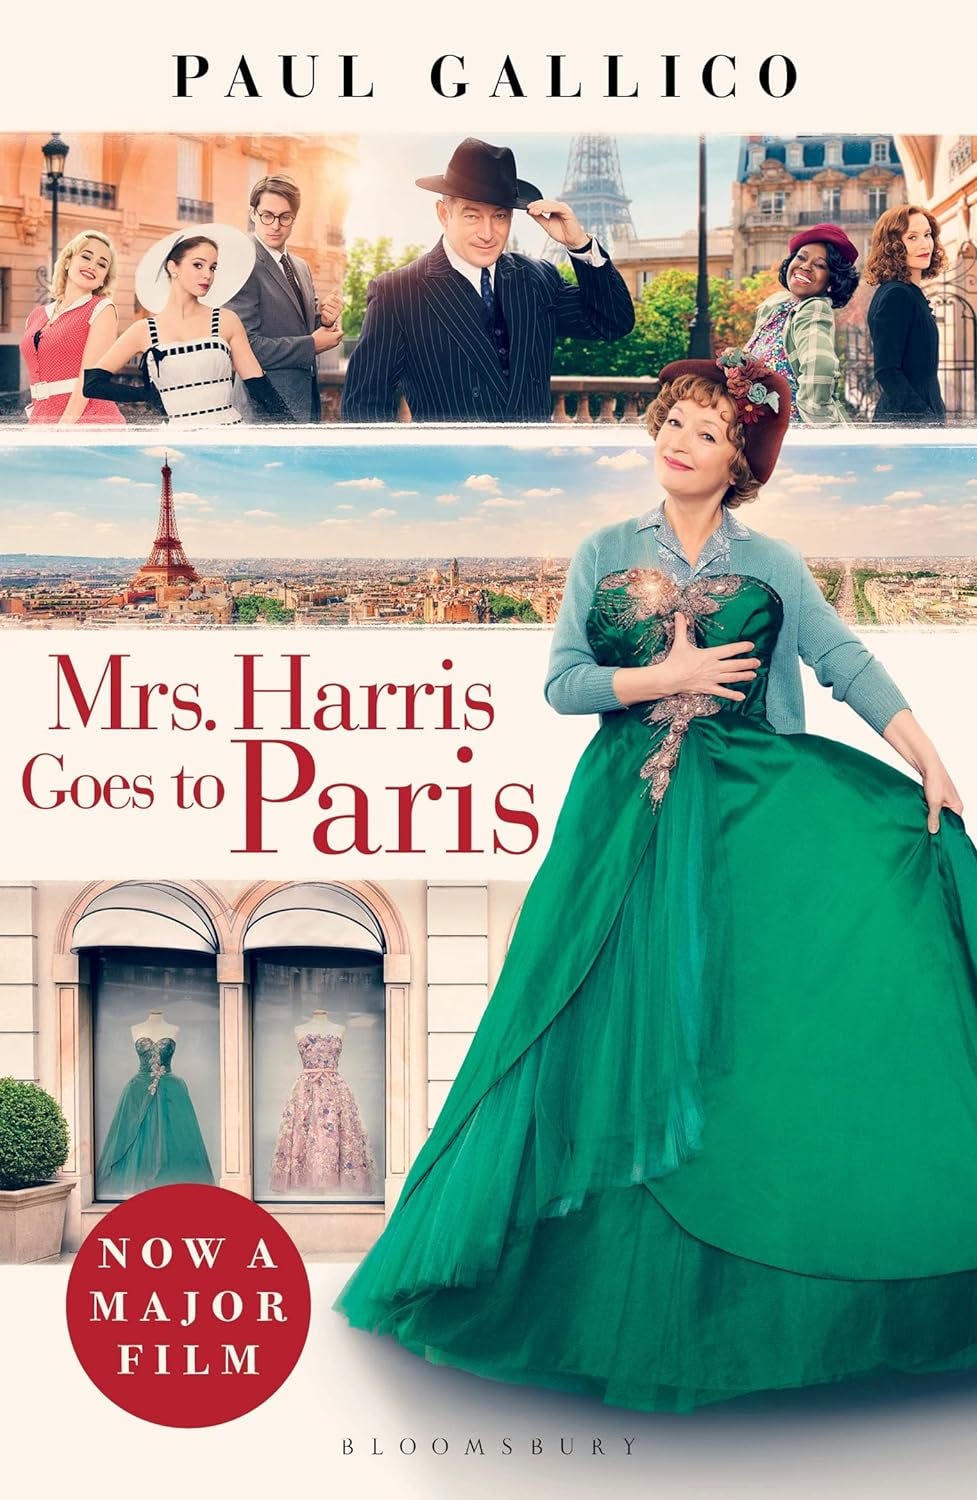 Book cover shows a confident woman holding a green evening gown against herself, and images of various characters and views of Paris behind her.